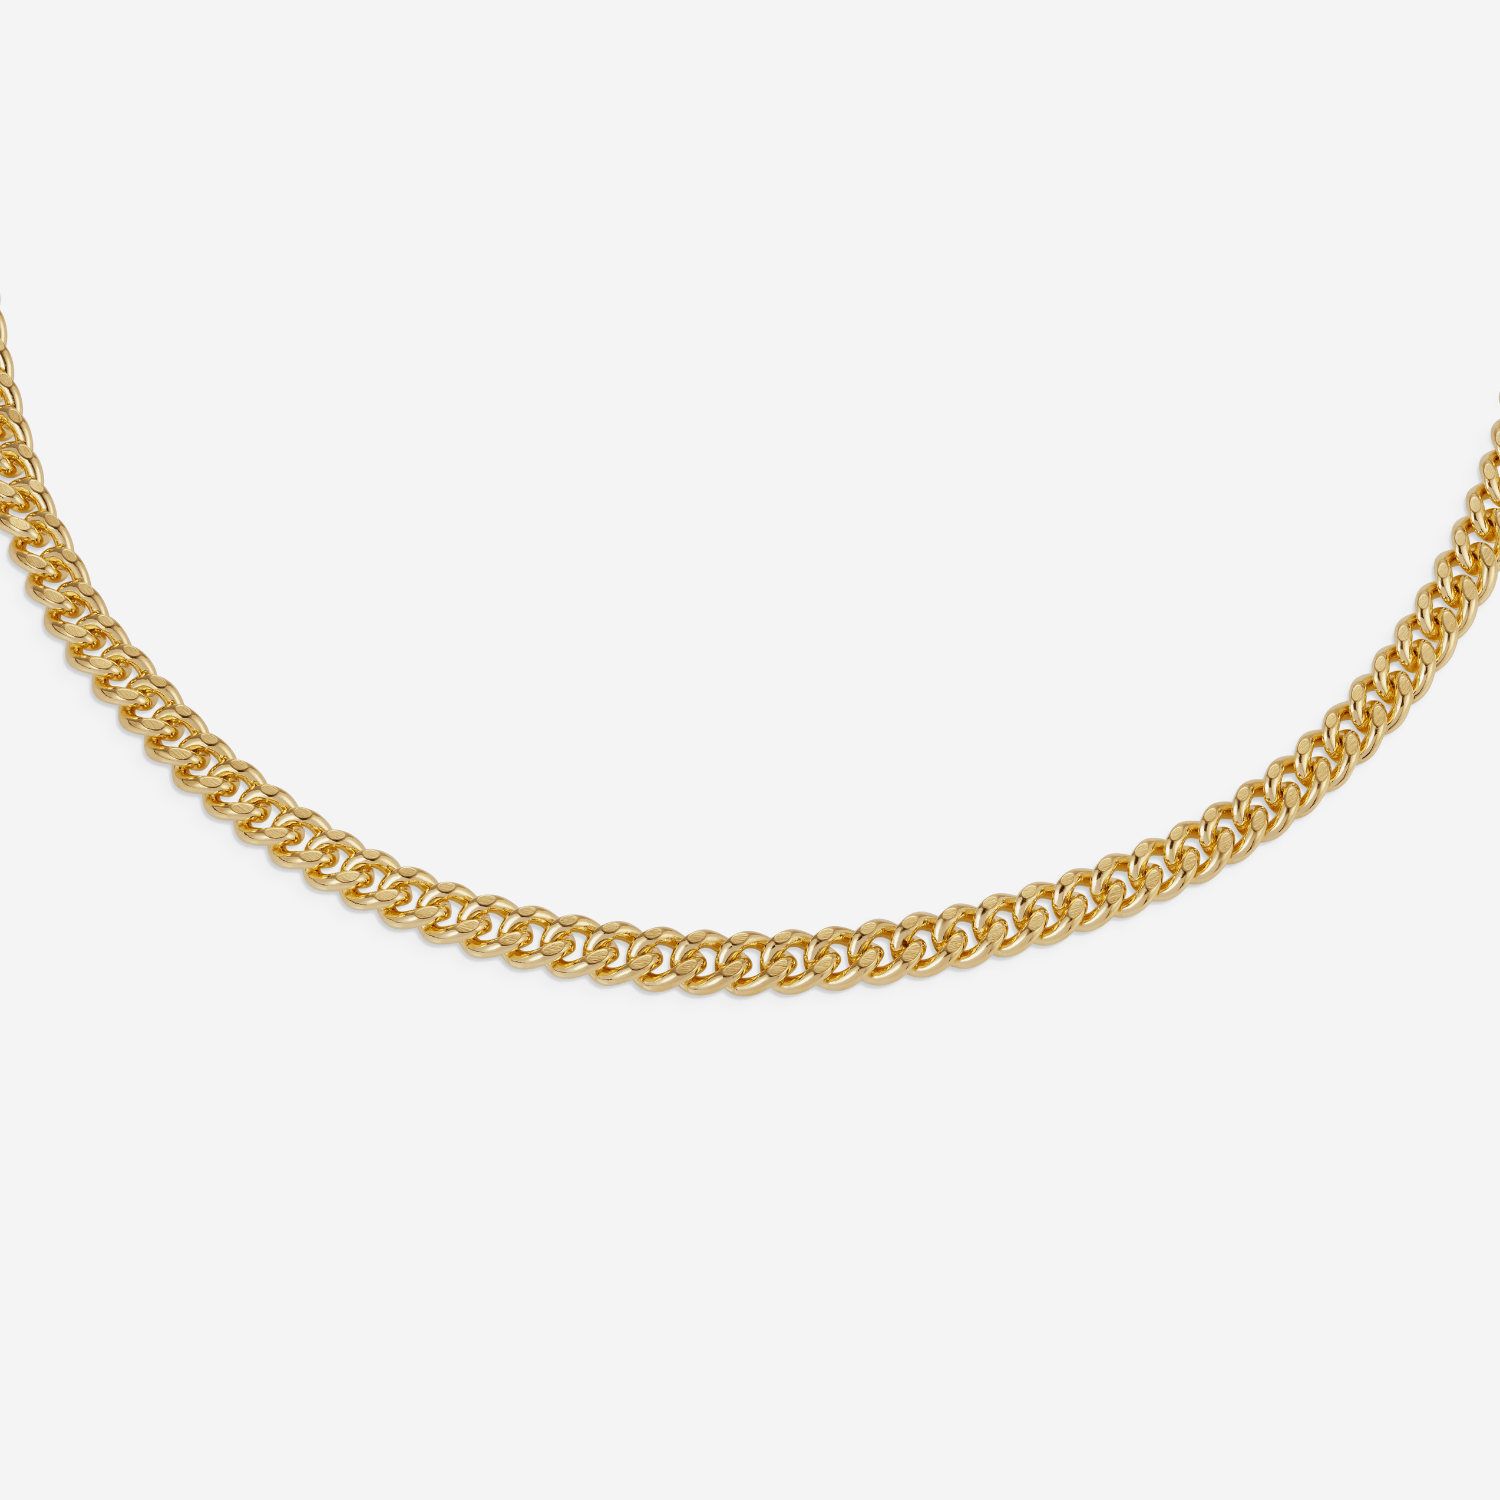 886 Royal Mint Necklaces 886 Fine Curb Chain in 18ct Yellow Gold